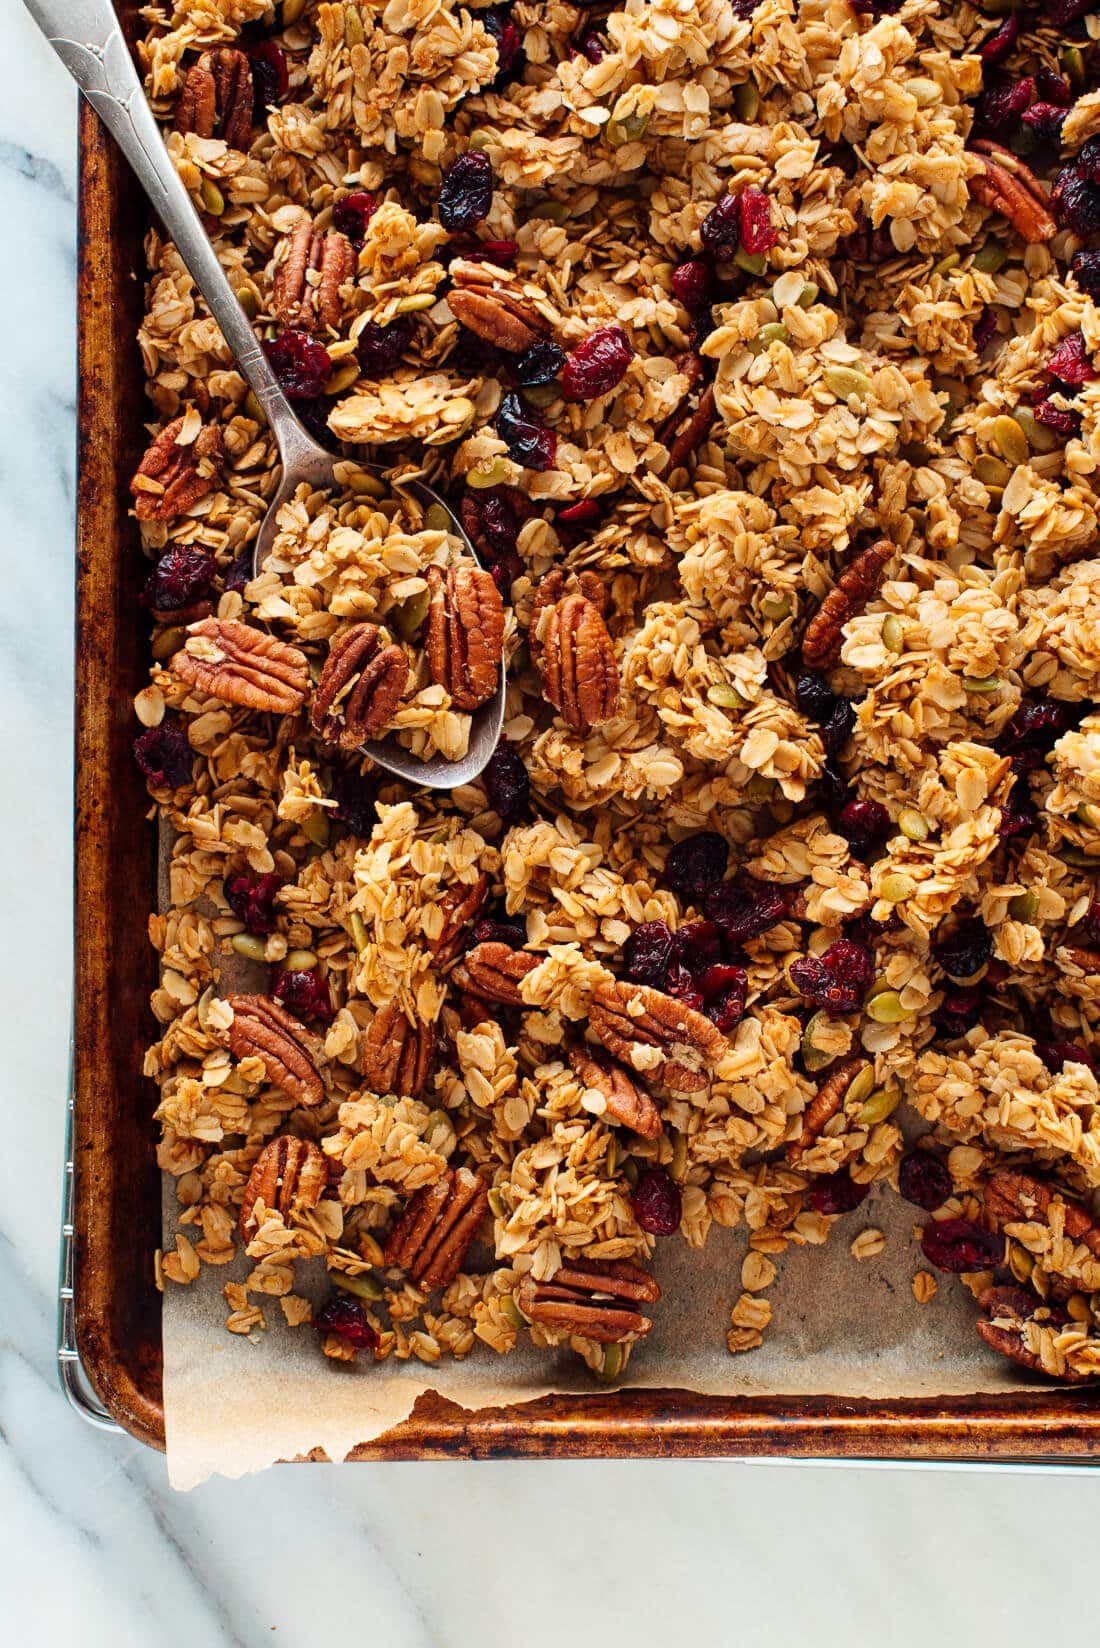 Homemade granola with oats, pecans, and dried cranberries is laid out on a baking sheet.